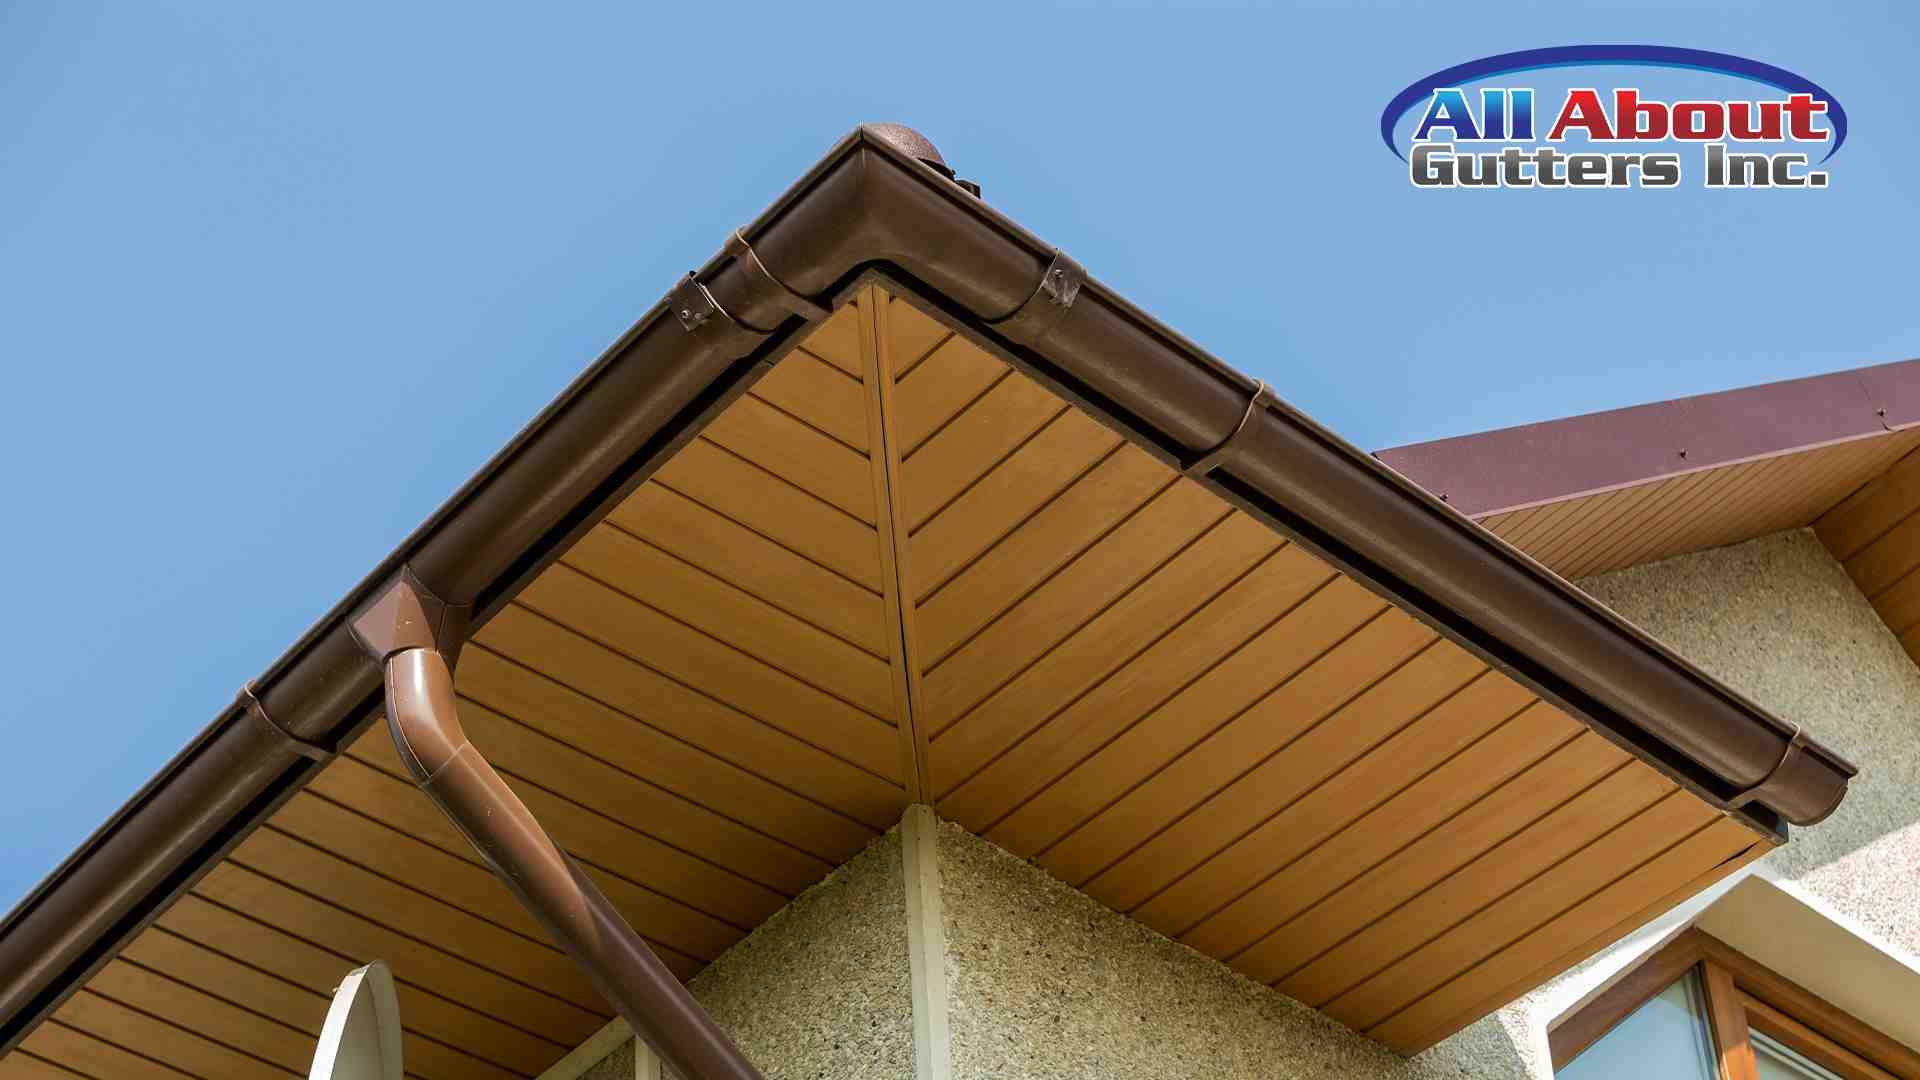 Gutter Cleaning Service from All About Gutters